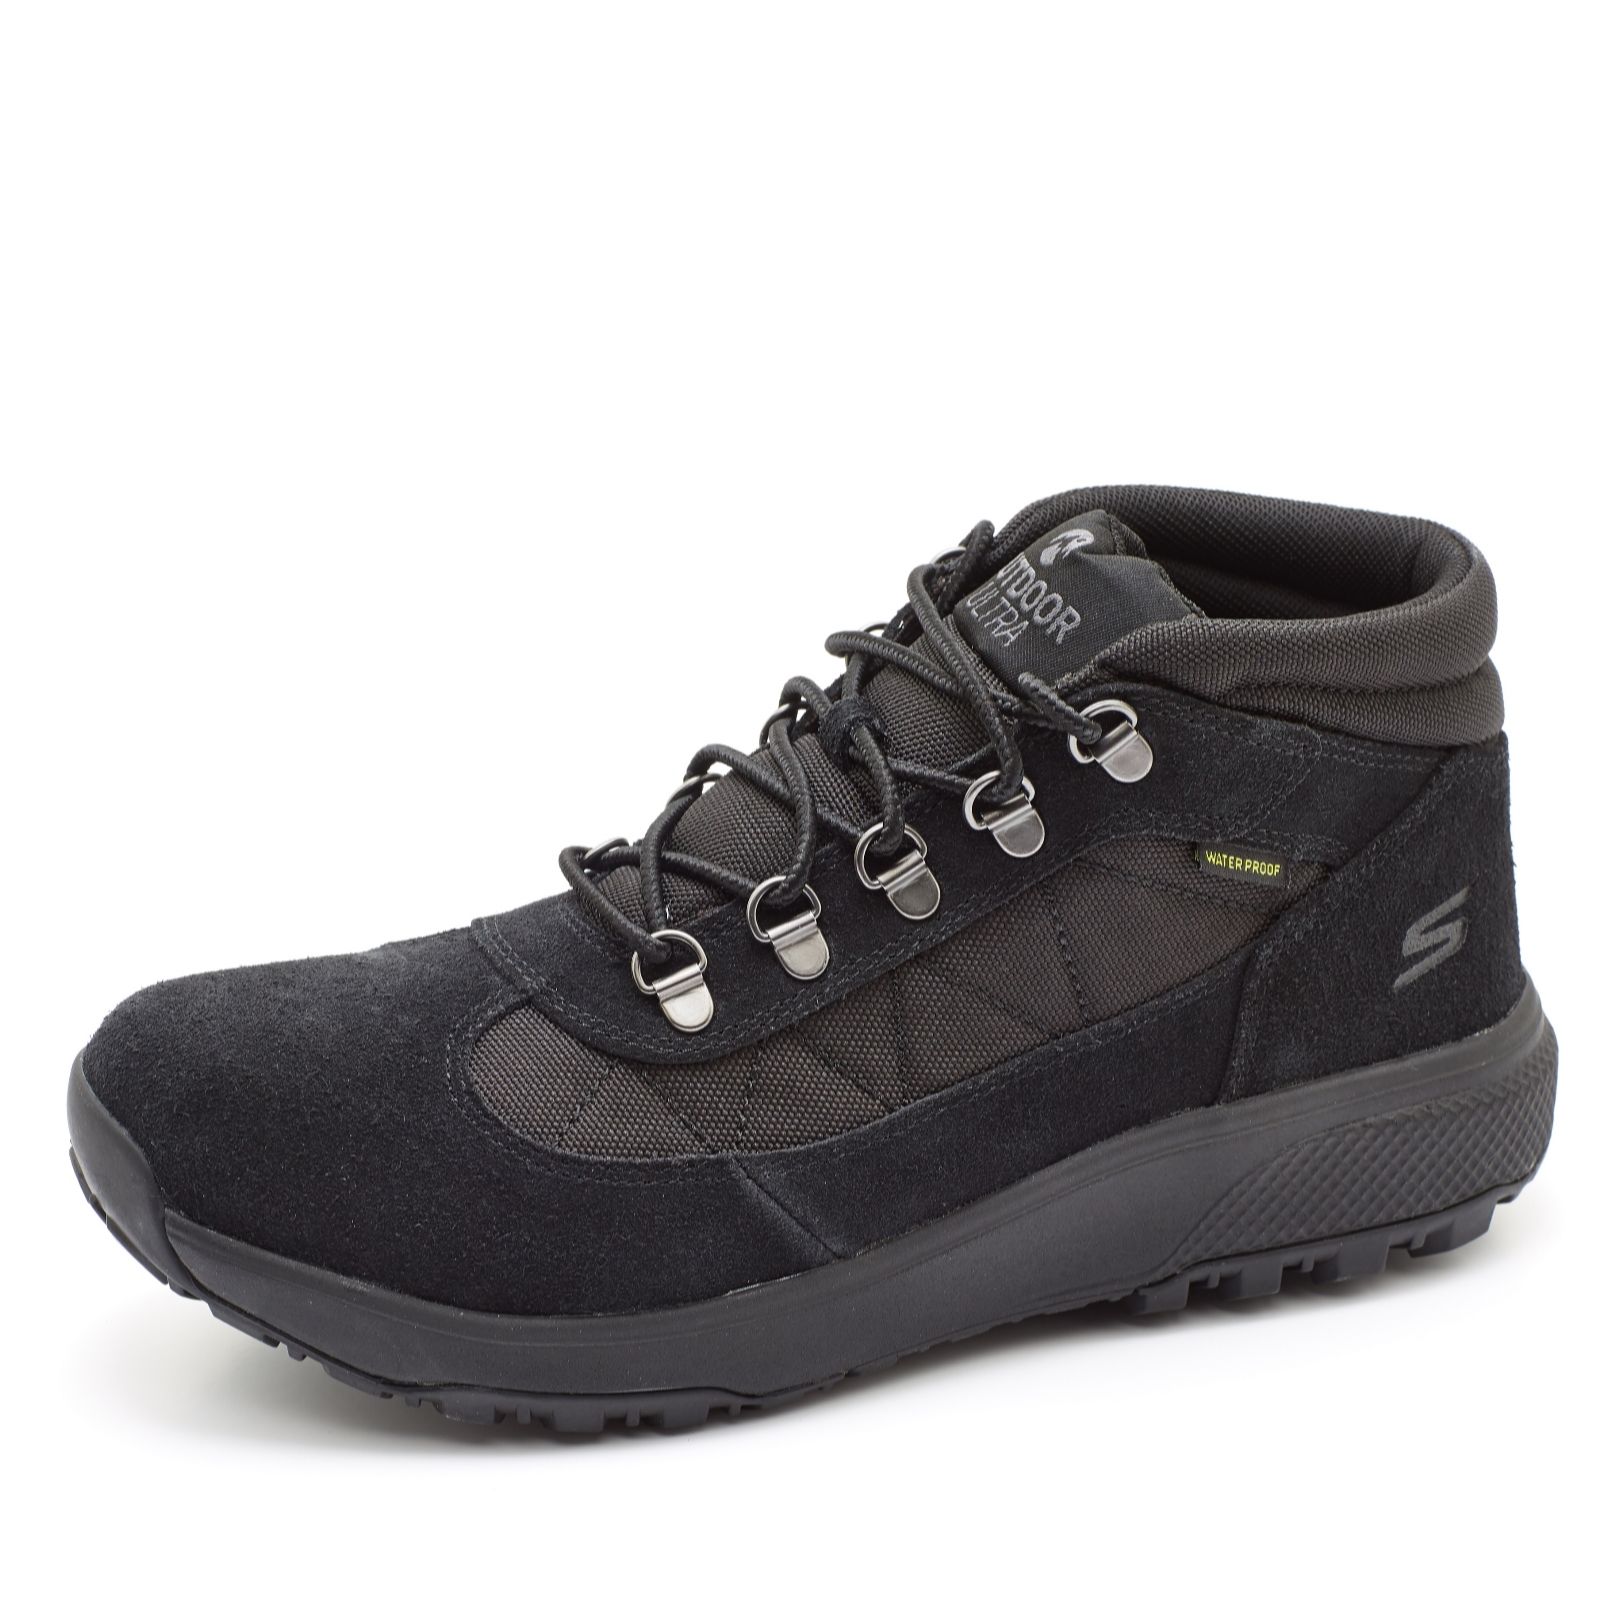 skechers all weather boots